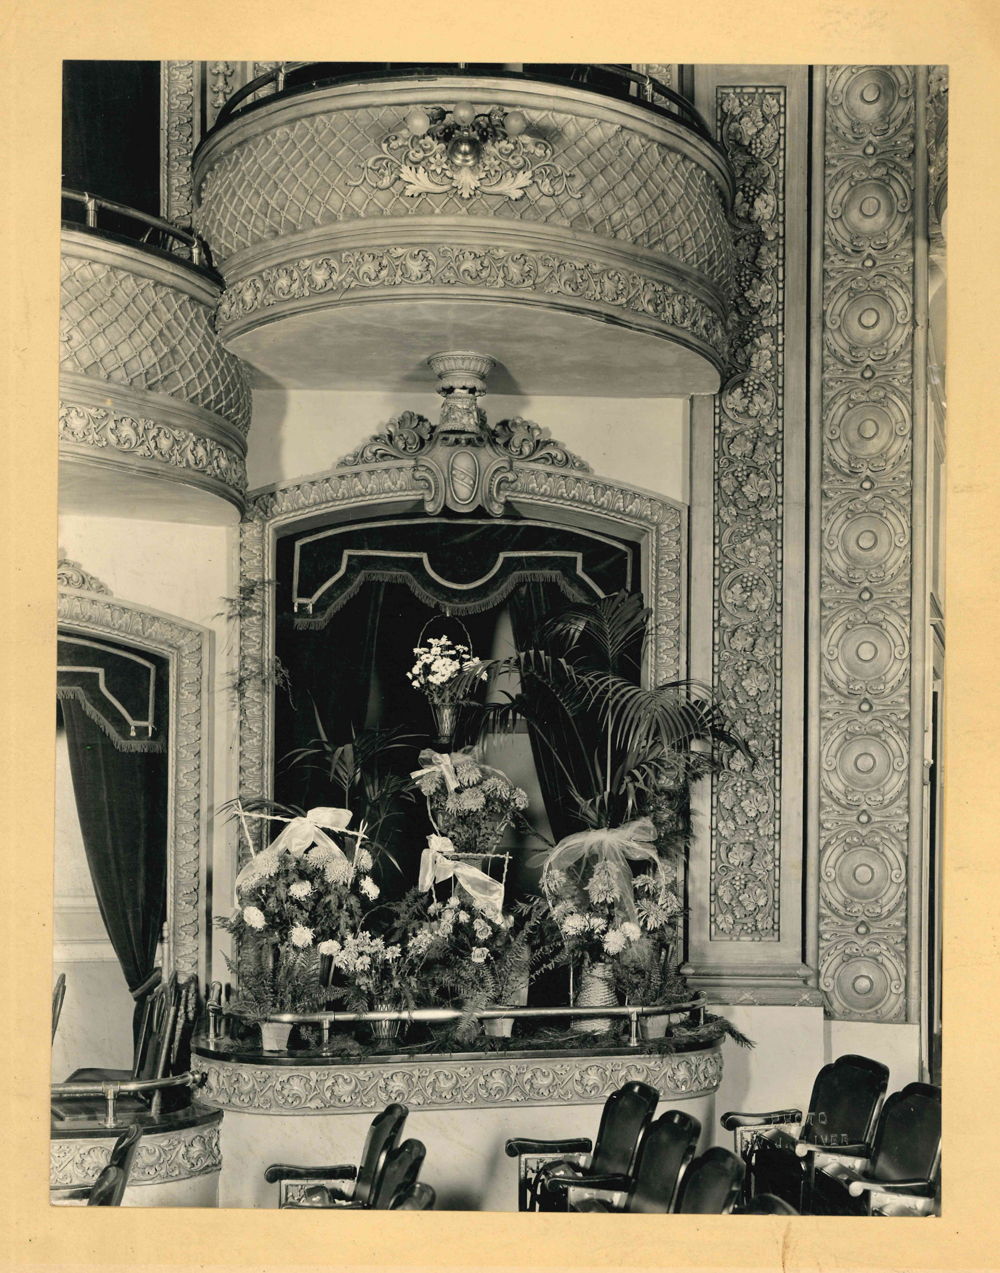 Photo of the Lougheed family box at the Grand Theatre. Flowers and wreaths suggest it may have been after the death of a family member.